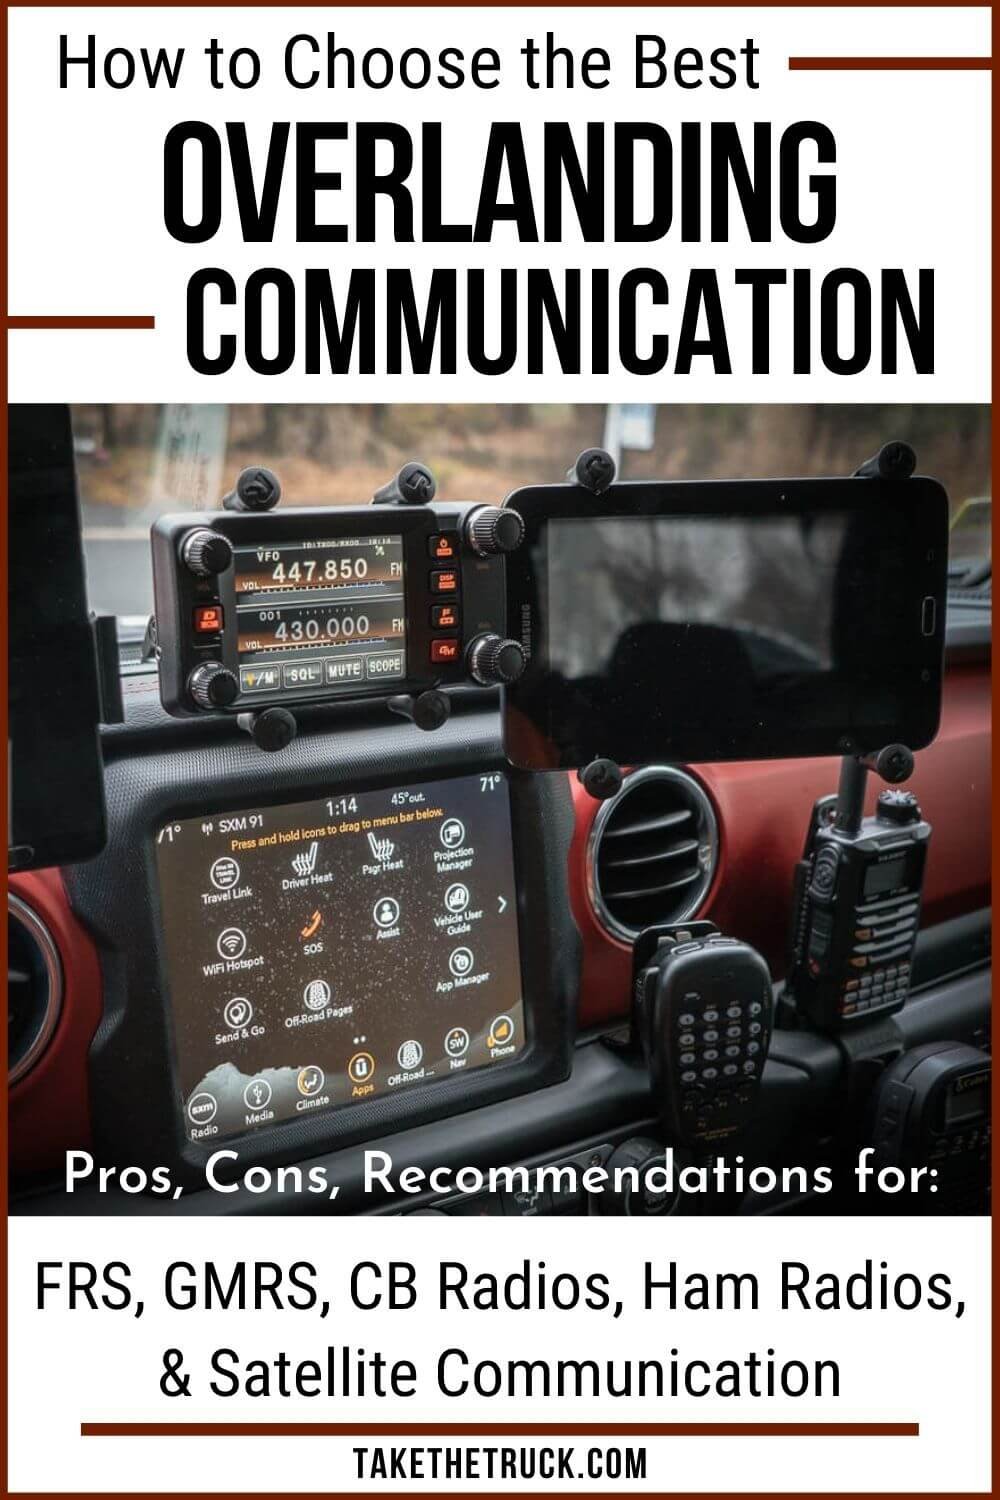 Off road communication and overland communication options from FRS, GMRS, CB radios, overland ham radios, to satellite communication. Find the best off road radio or overlanding communications.